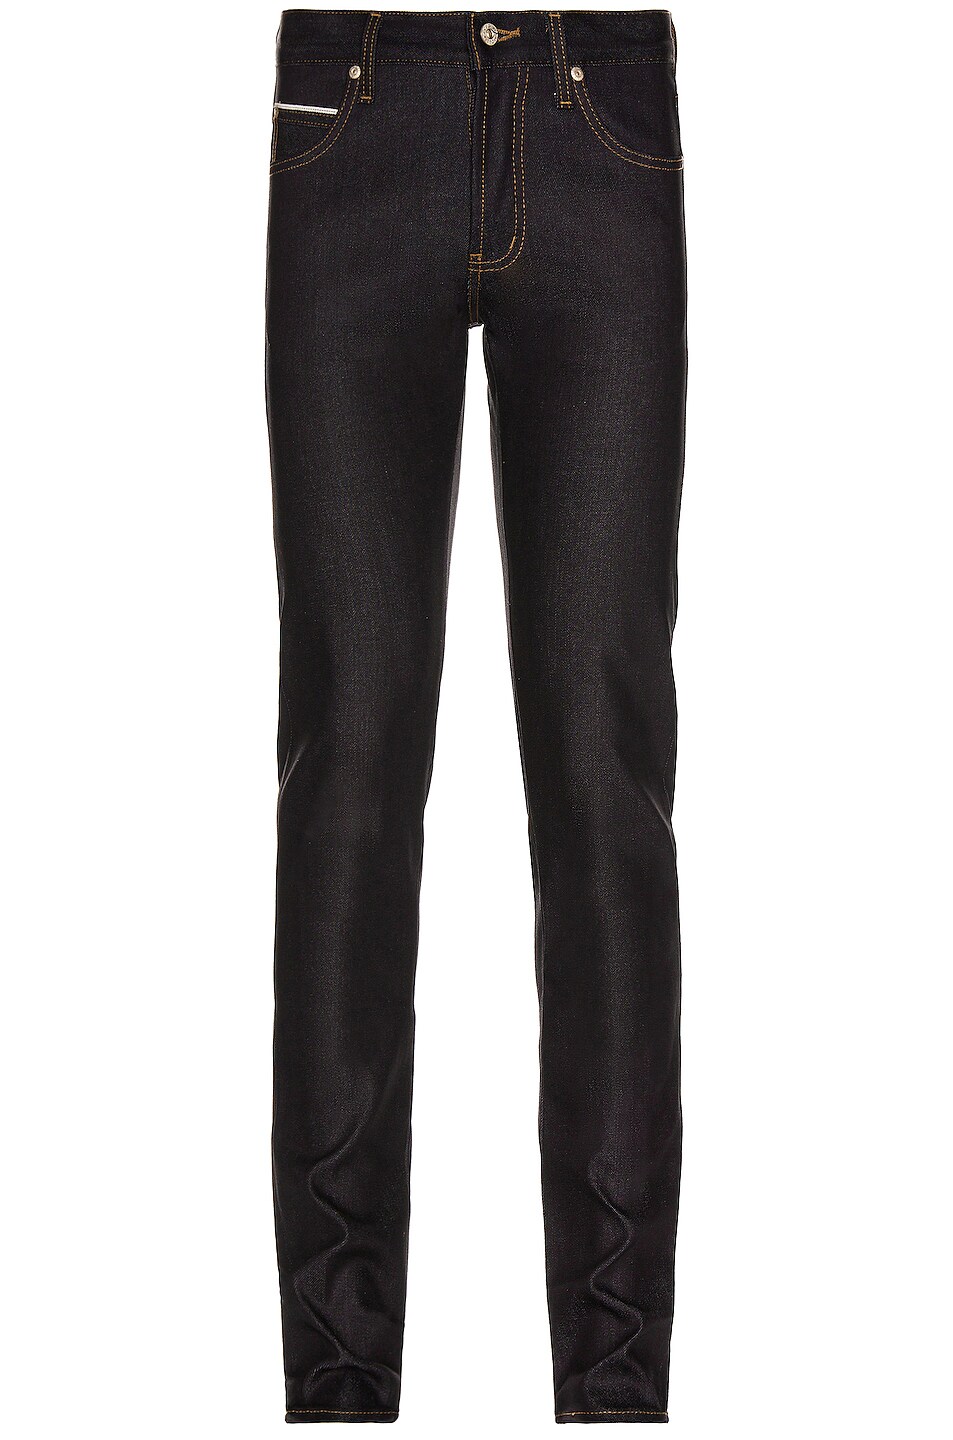 Image 1 of Naked & Famous Denim Super Guy Skinny Jean in Nightshade Stretch Selvedge